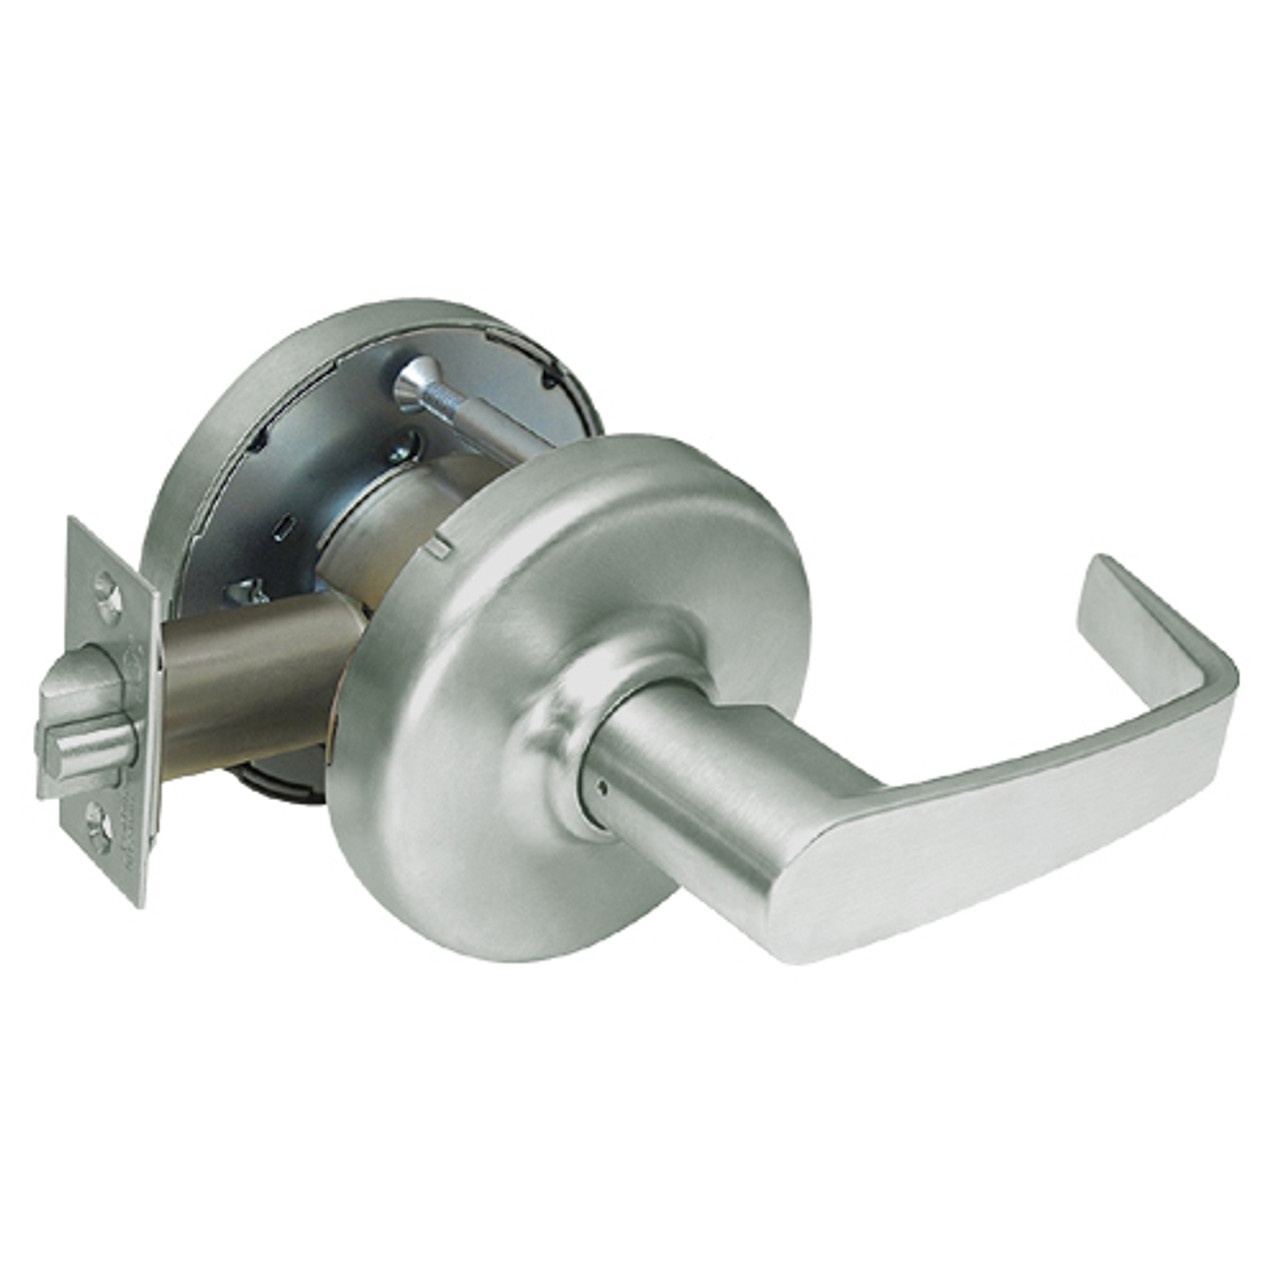 CL3390-NZD-619 Corbin CL3300 Series Extra Heavy Duty Passage with Turnpiece Cylindrical Locksets with Newport Lever in Satin Nickel Plated Finish